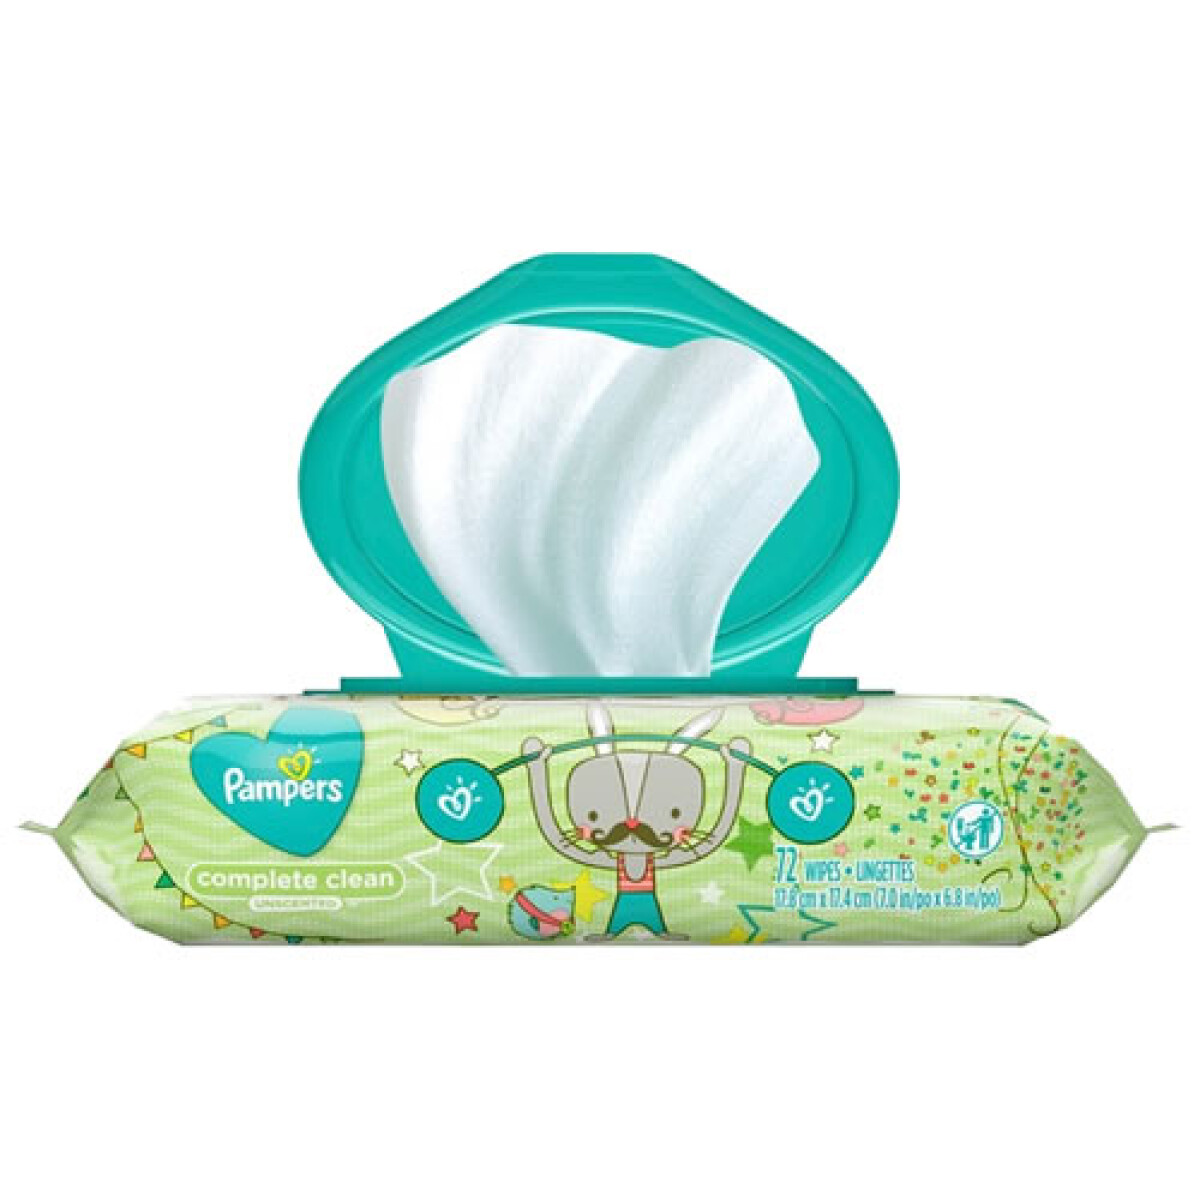 TOALLAS HUMEDAS PAMPERS WIPE UNSCENT COMPLETE CLEAN X 72 